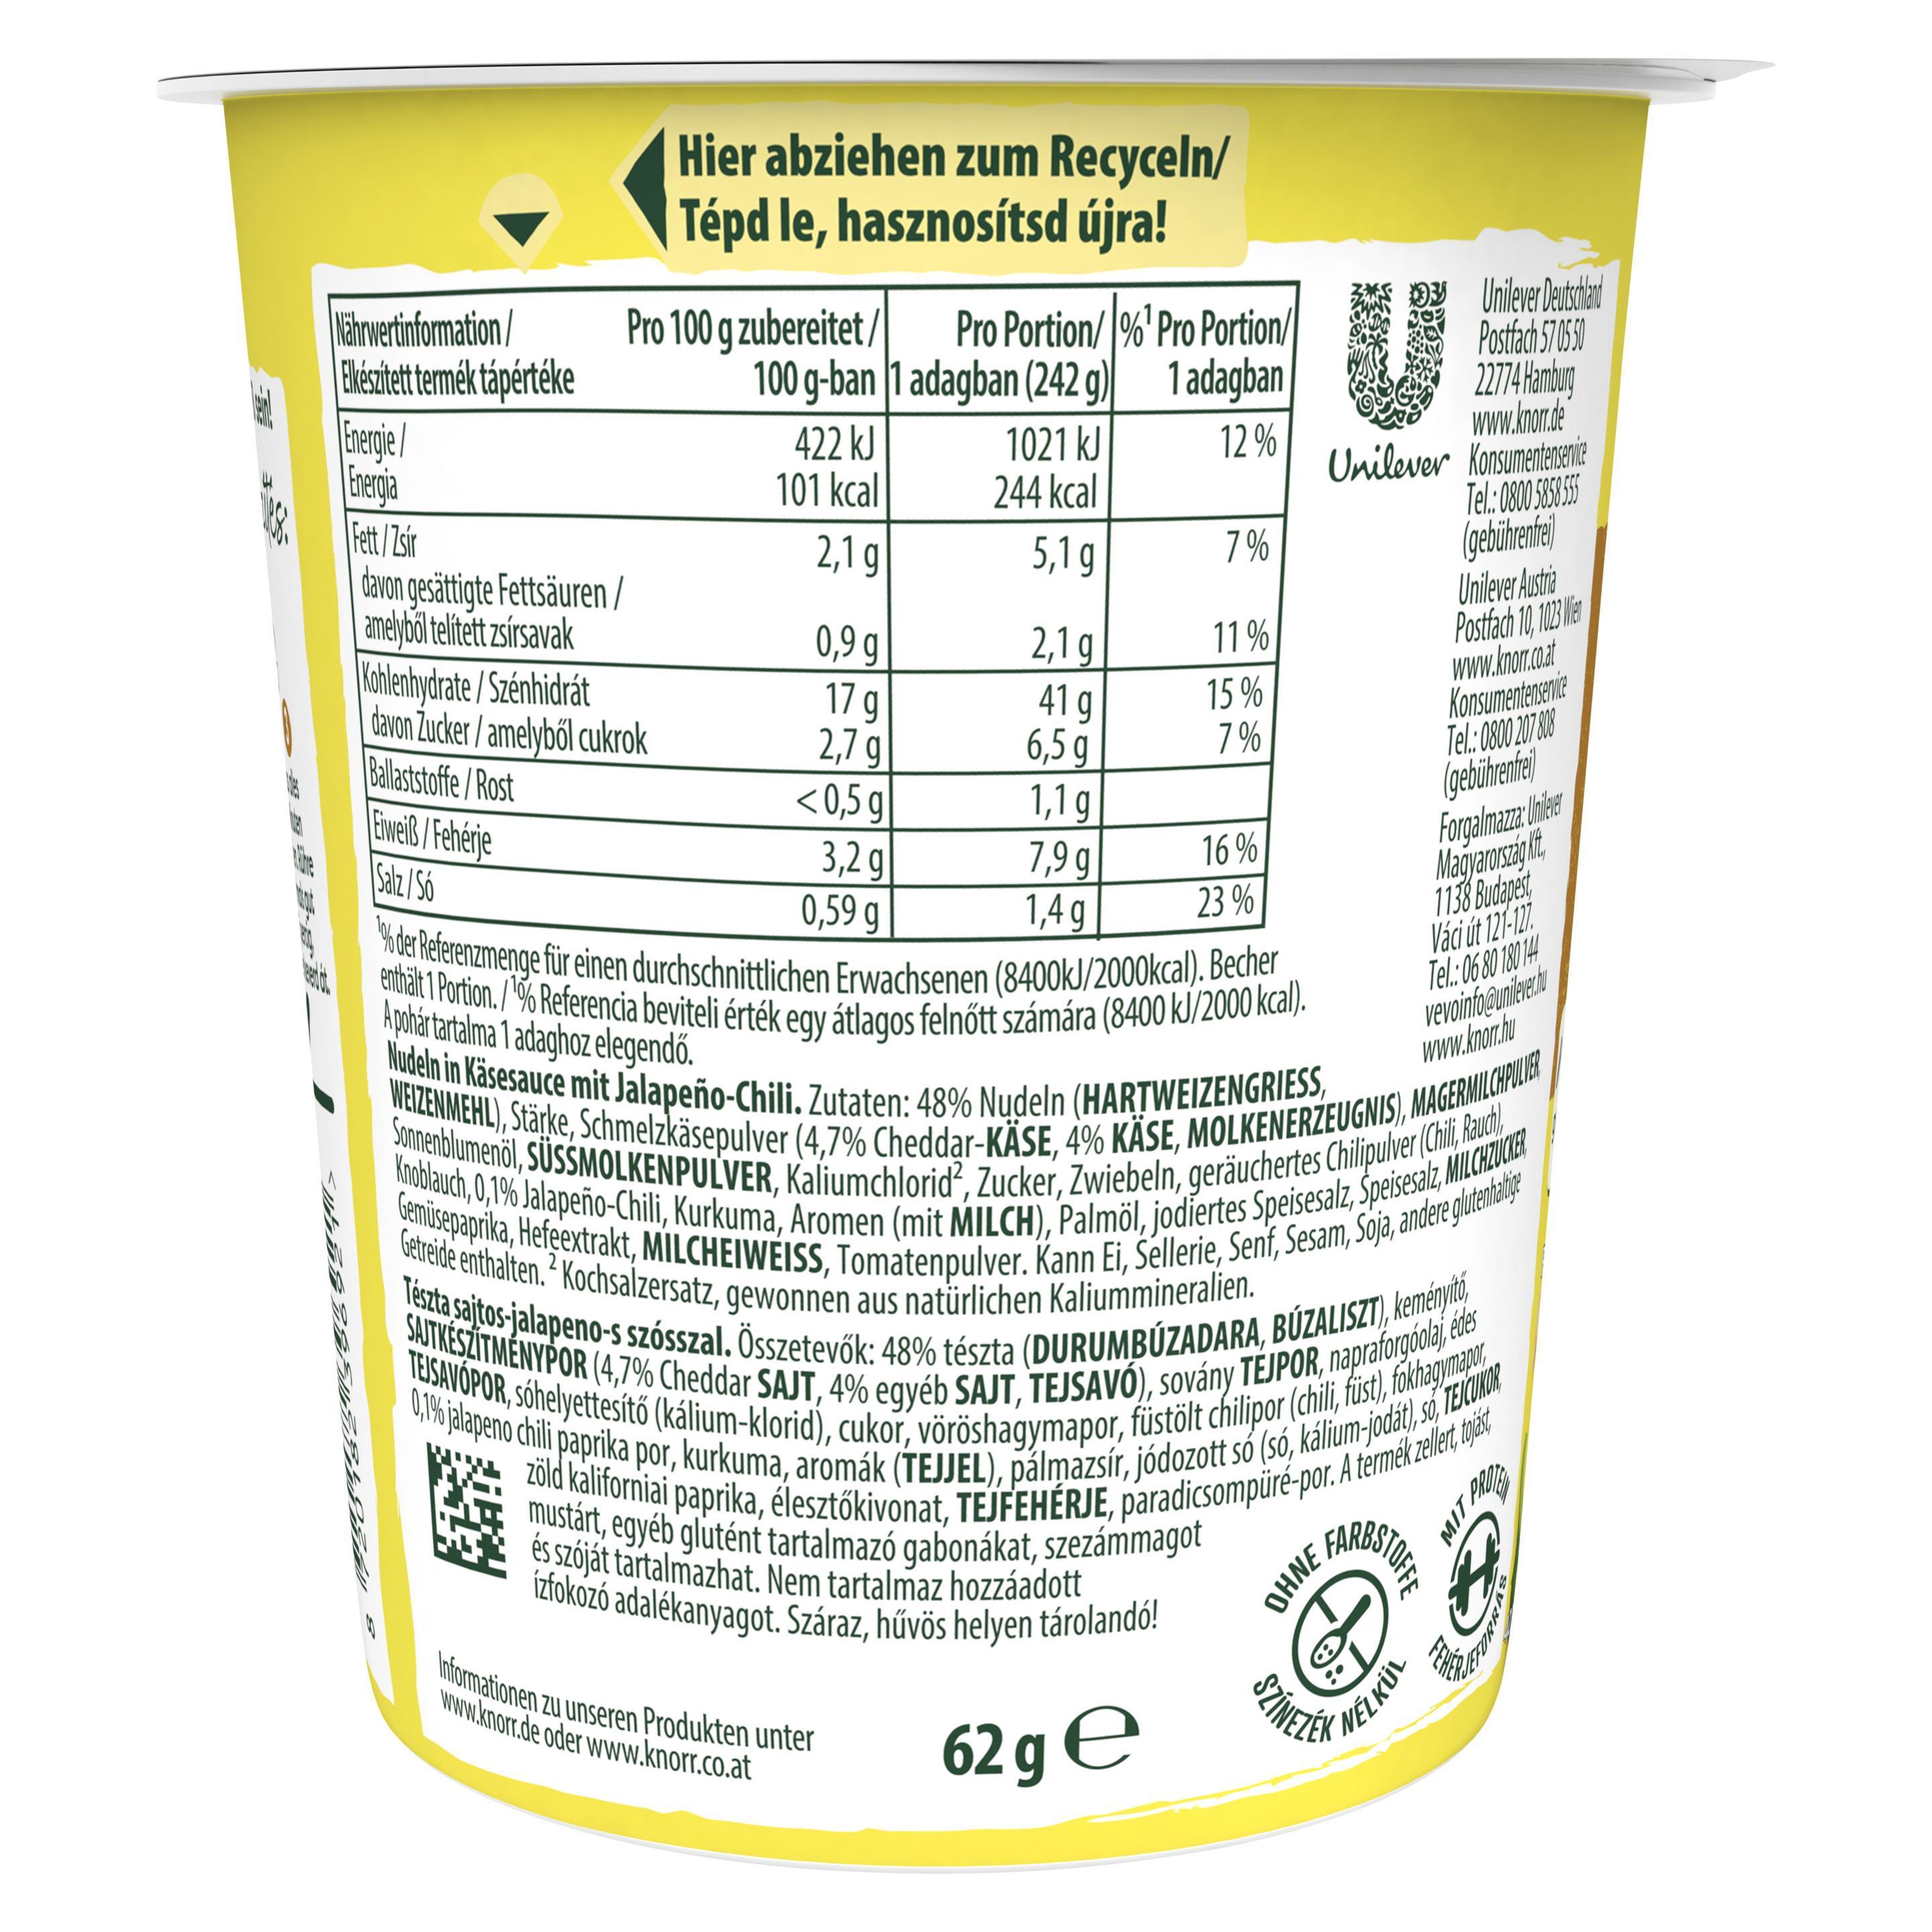 Knorr Taste the World Mac&Cheese Jalapeno 62g Becher